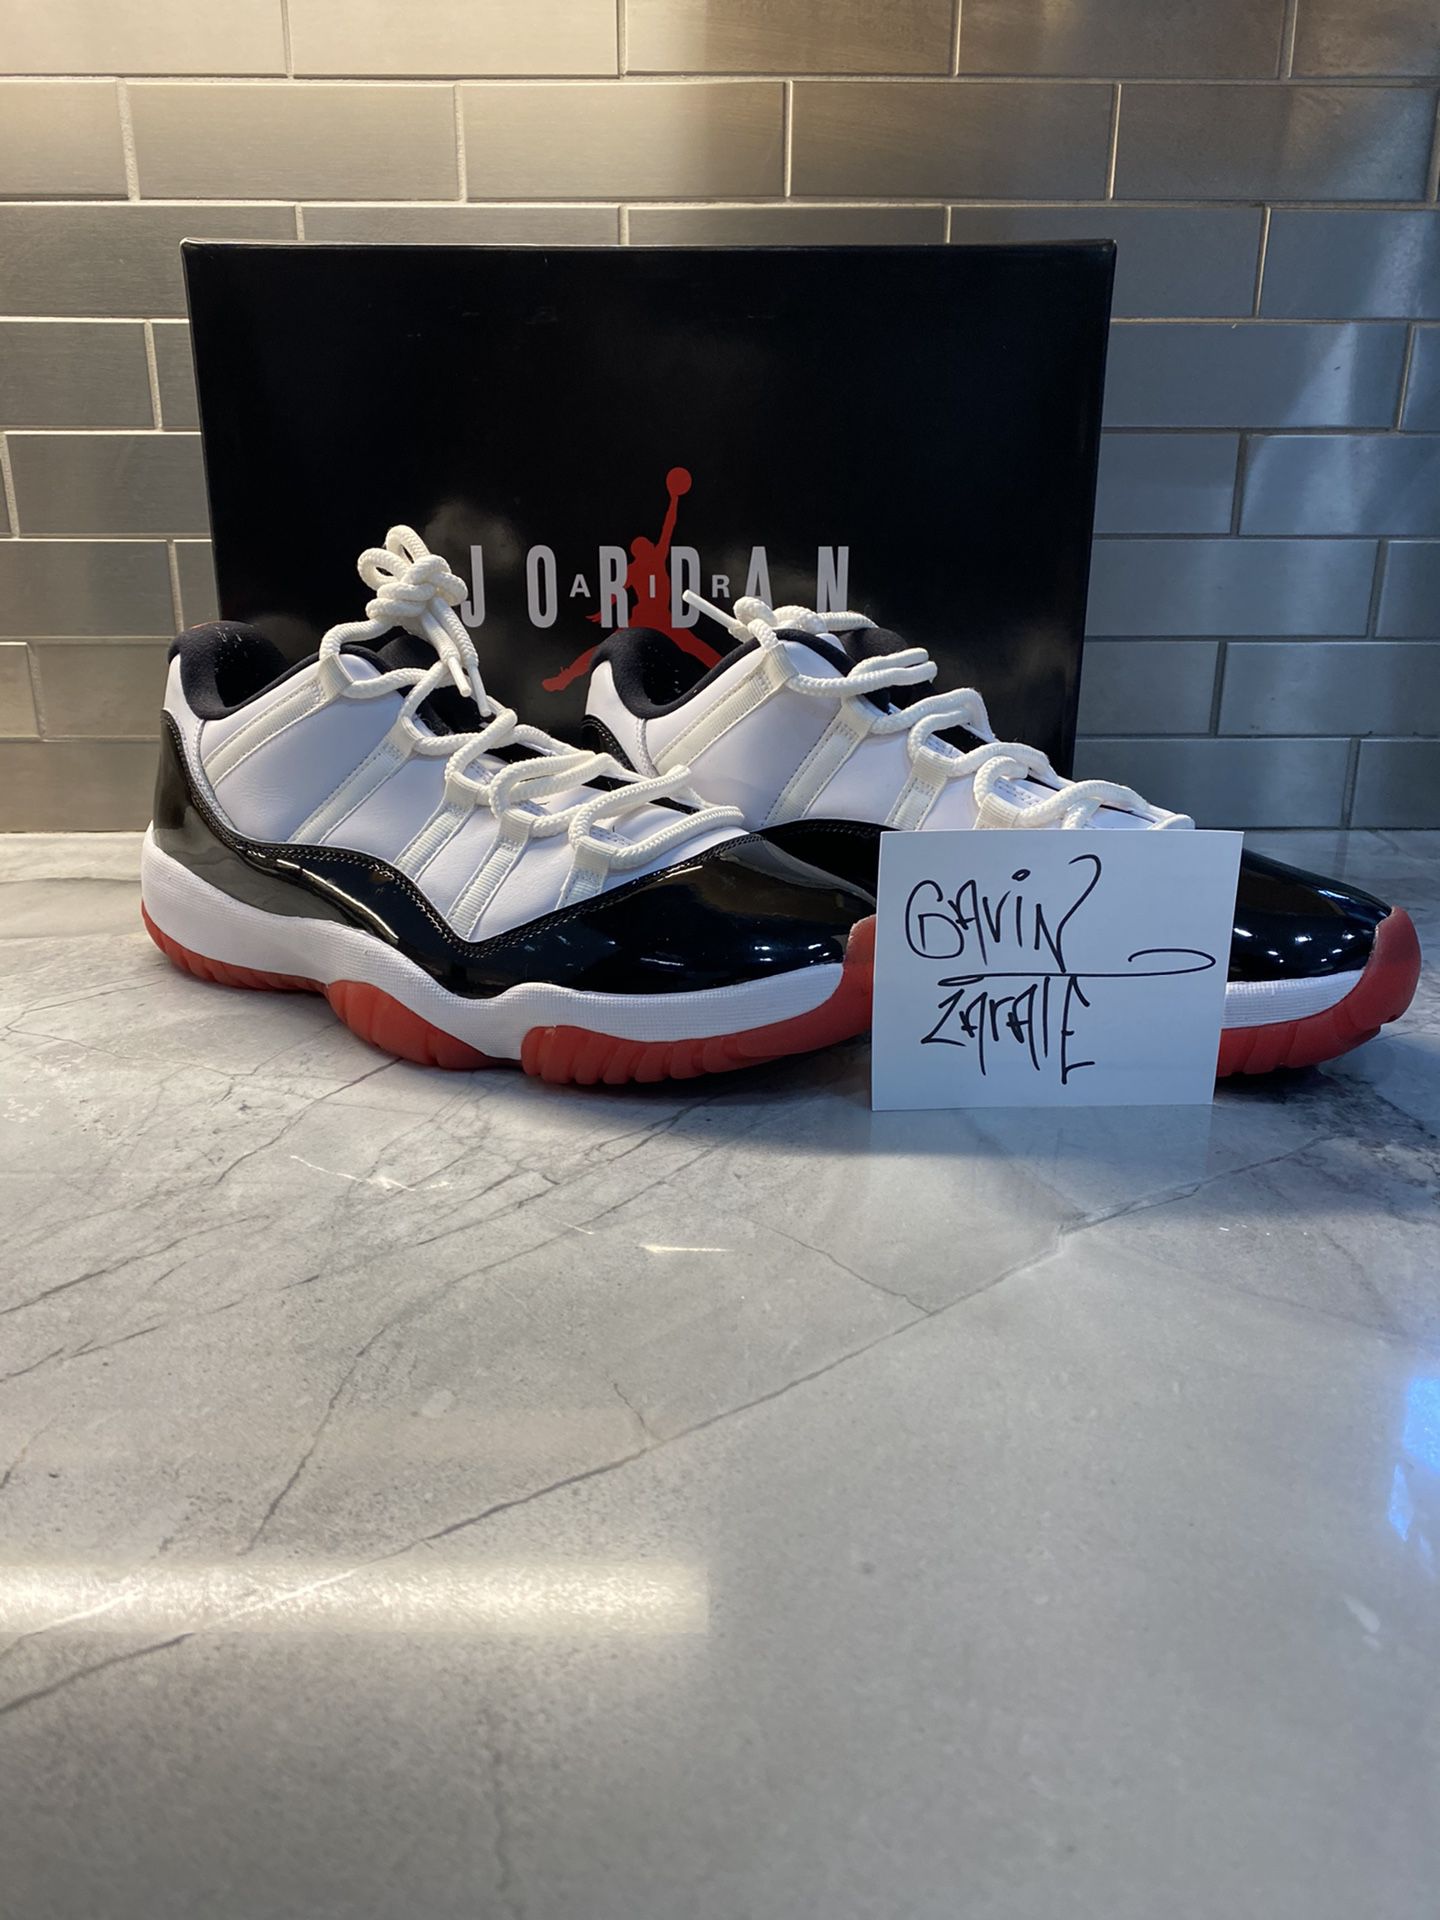 Jordan 11 low concord bred vnds size 12